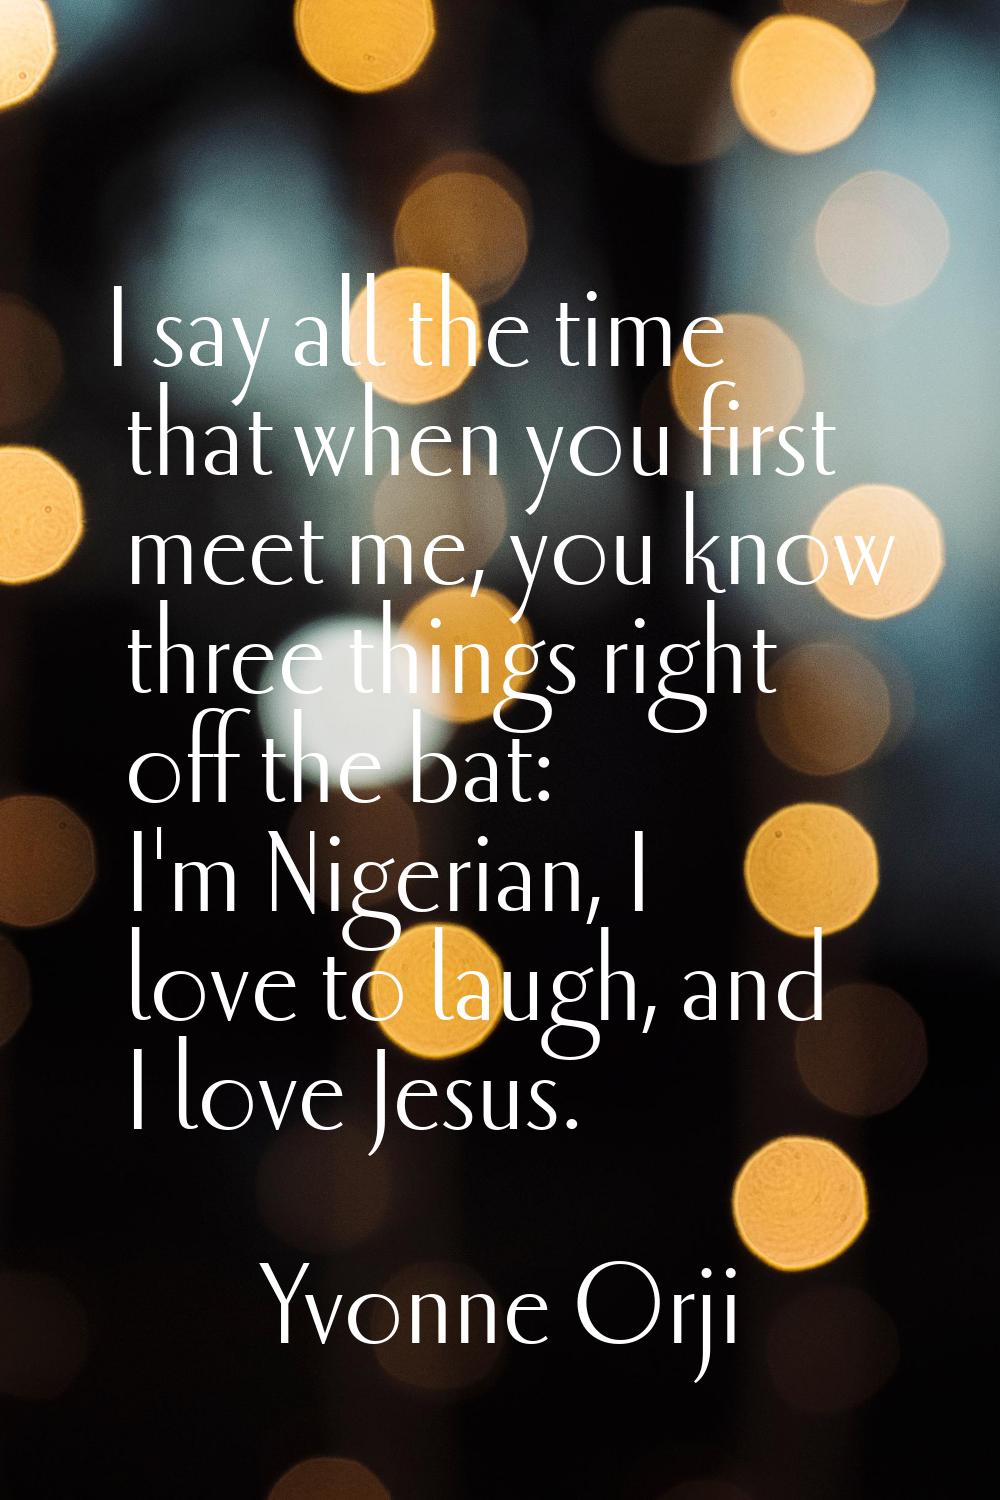 I say all the time that when you first meet me, you know three things right off the bat: I'm Nigeri